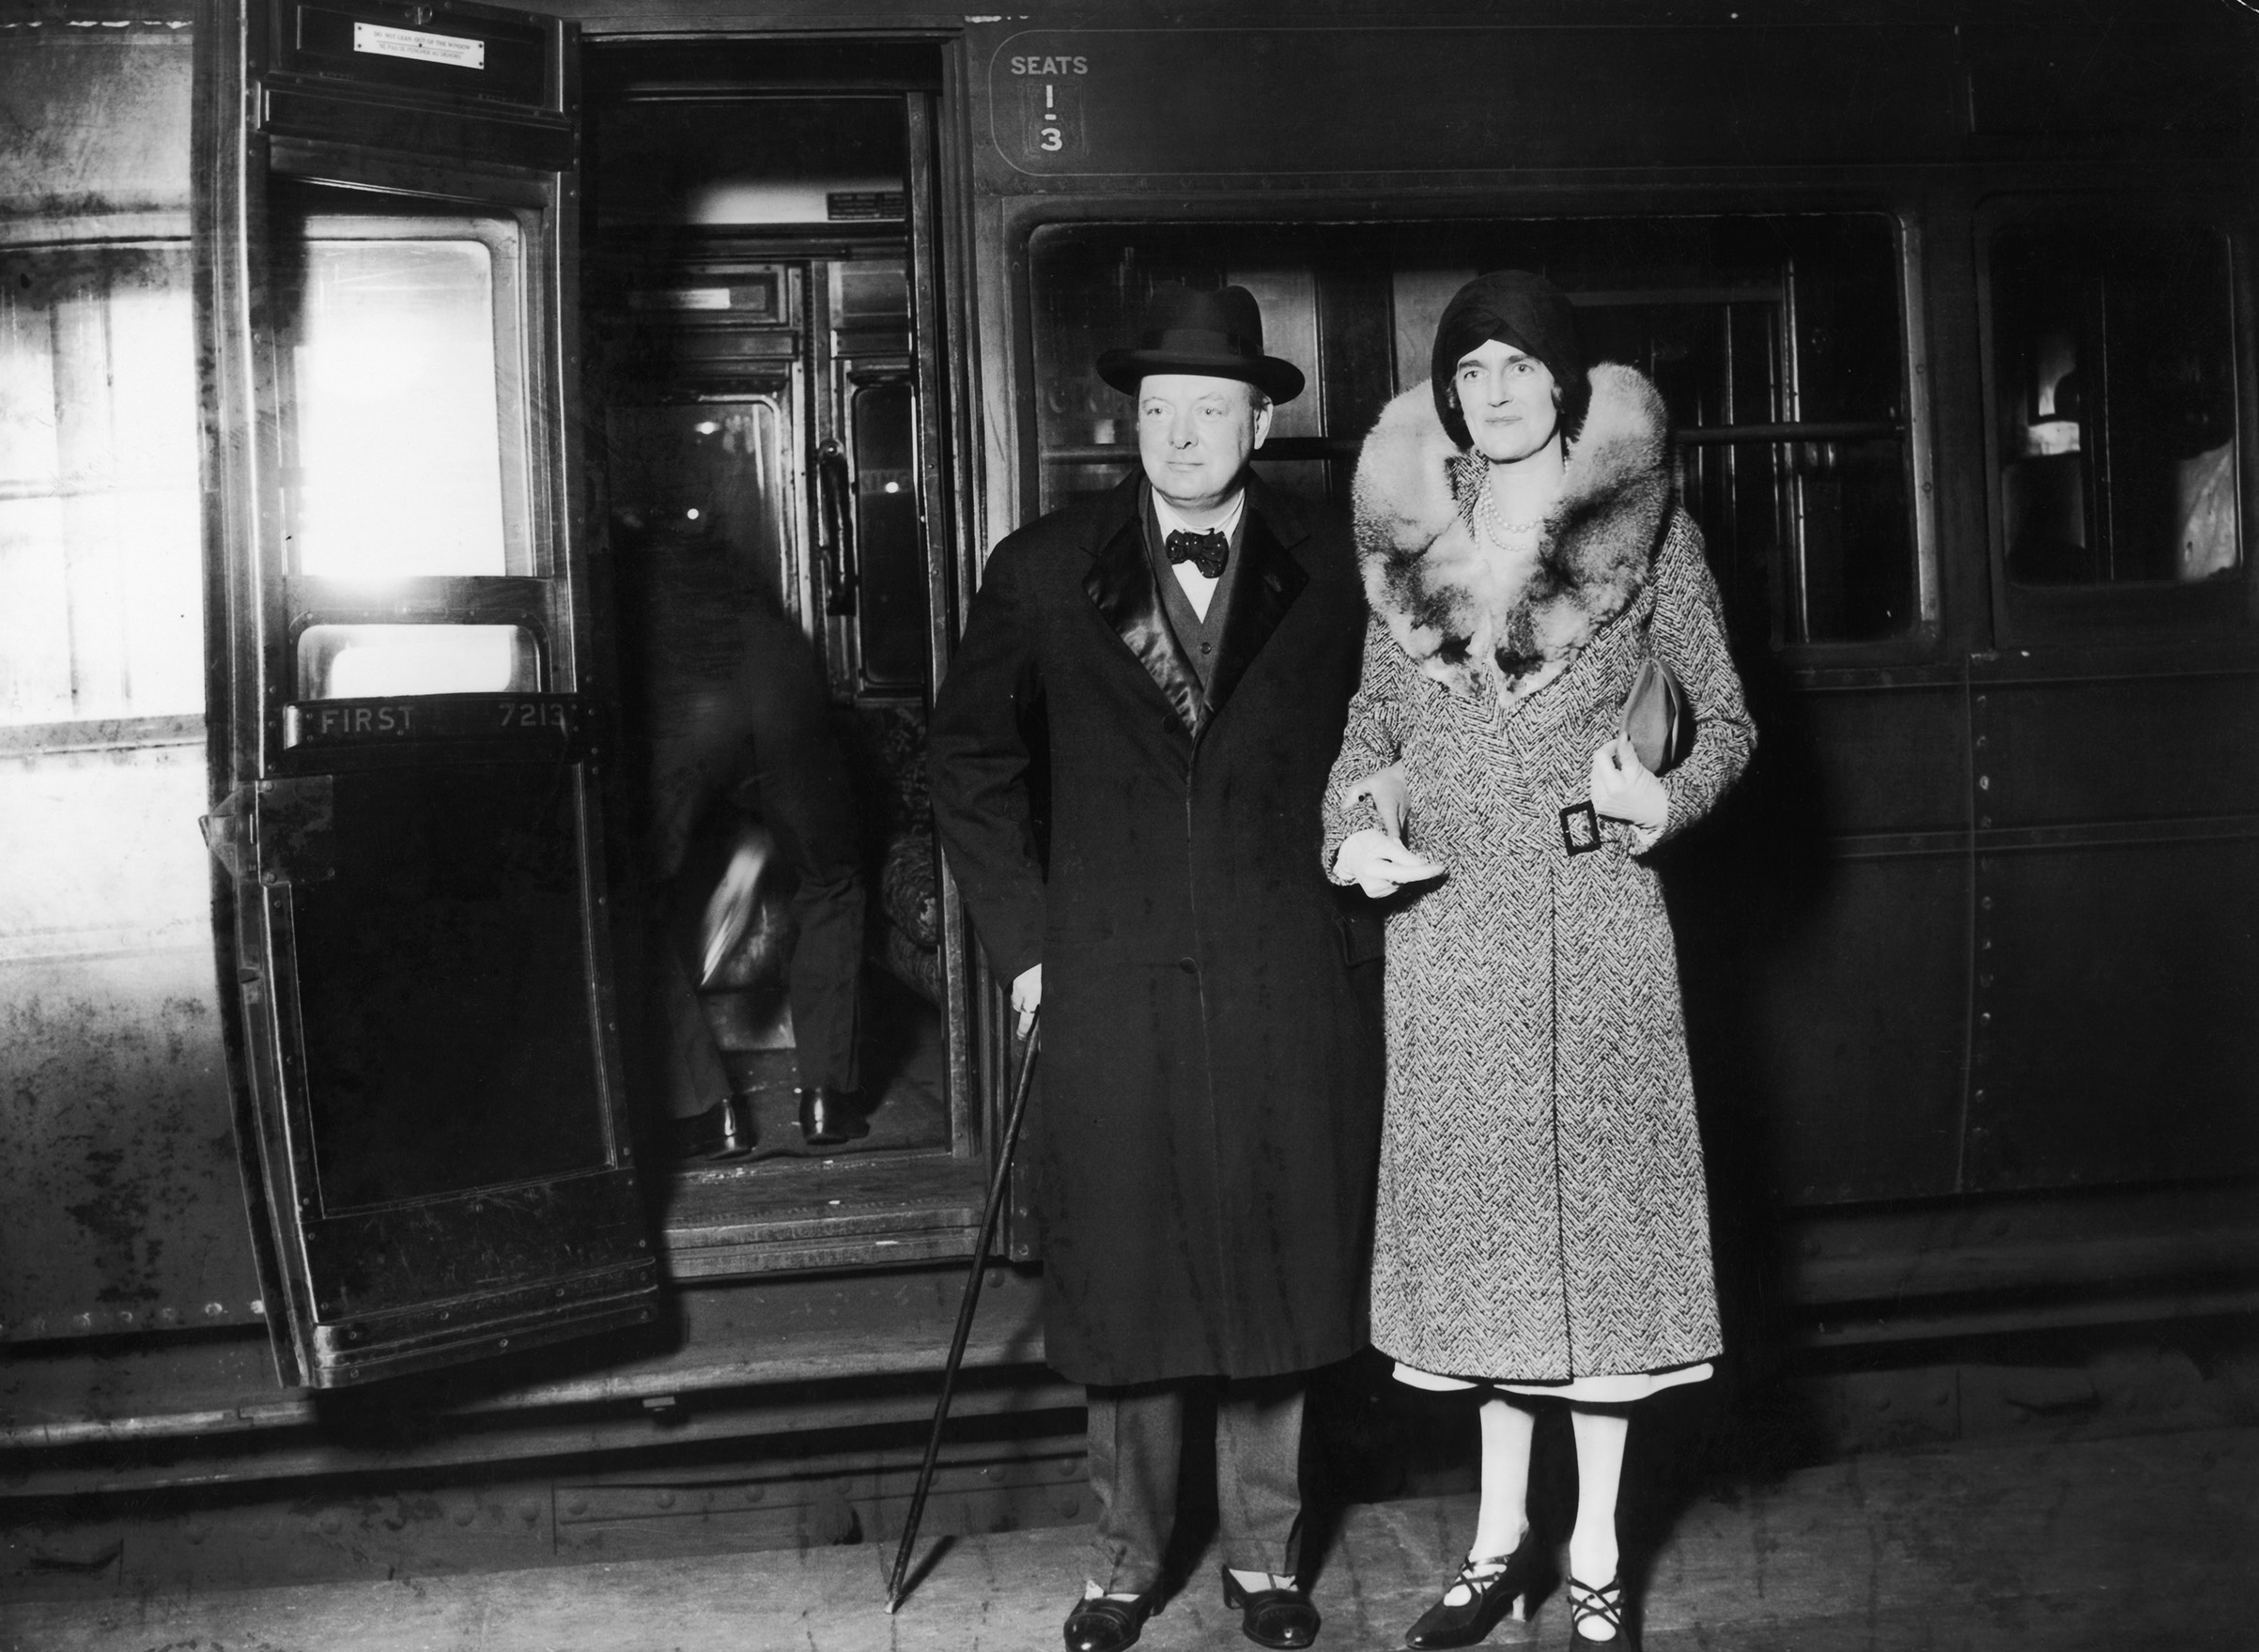 British statesman Winston Churchill and his wife Clementine arrive at Waterloo Station in London, after a visit to the United States, in Nov. 1929. (Gaiger/Topical Press Agency/Hulton Archive/Getty Images)